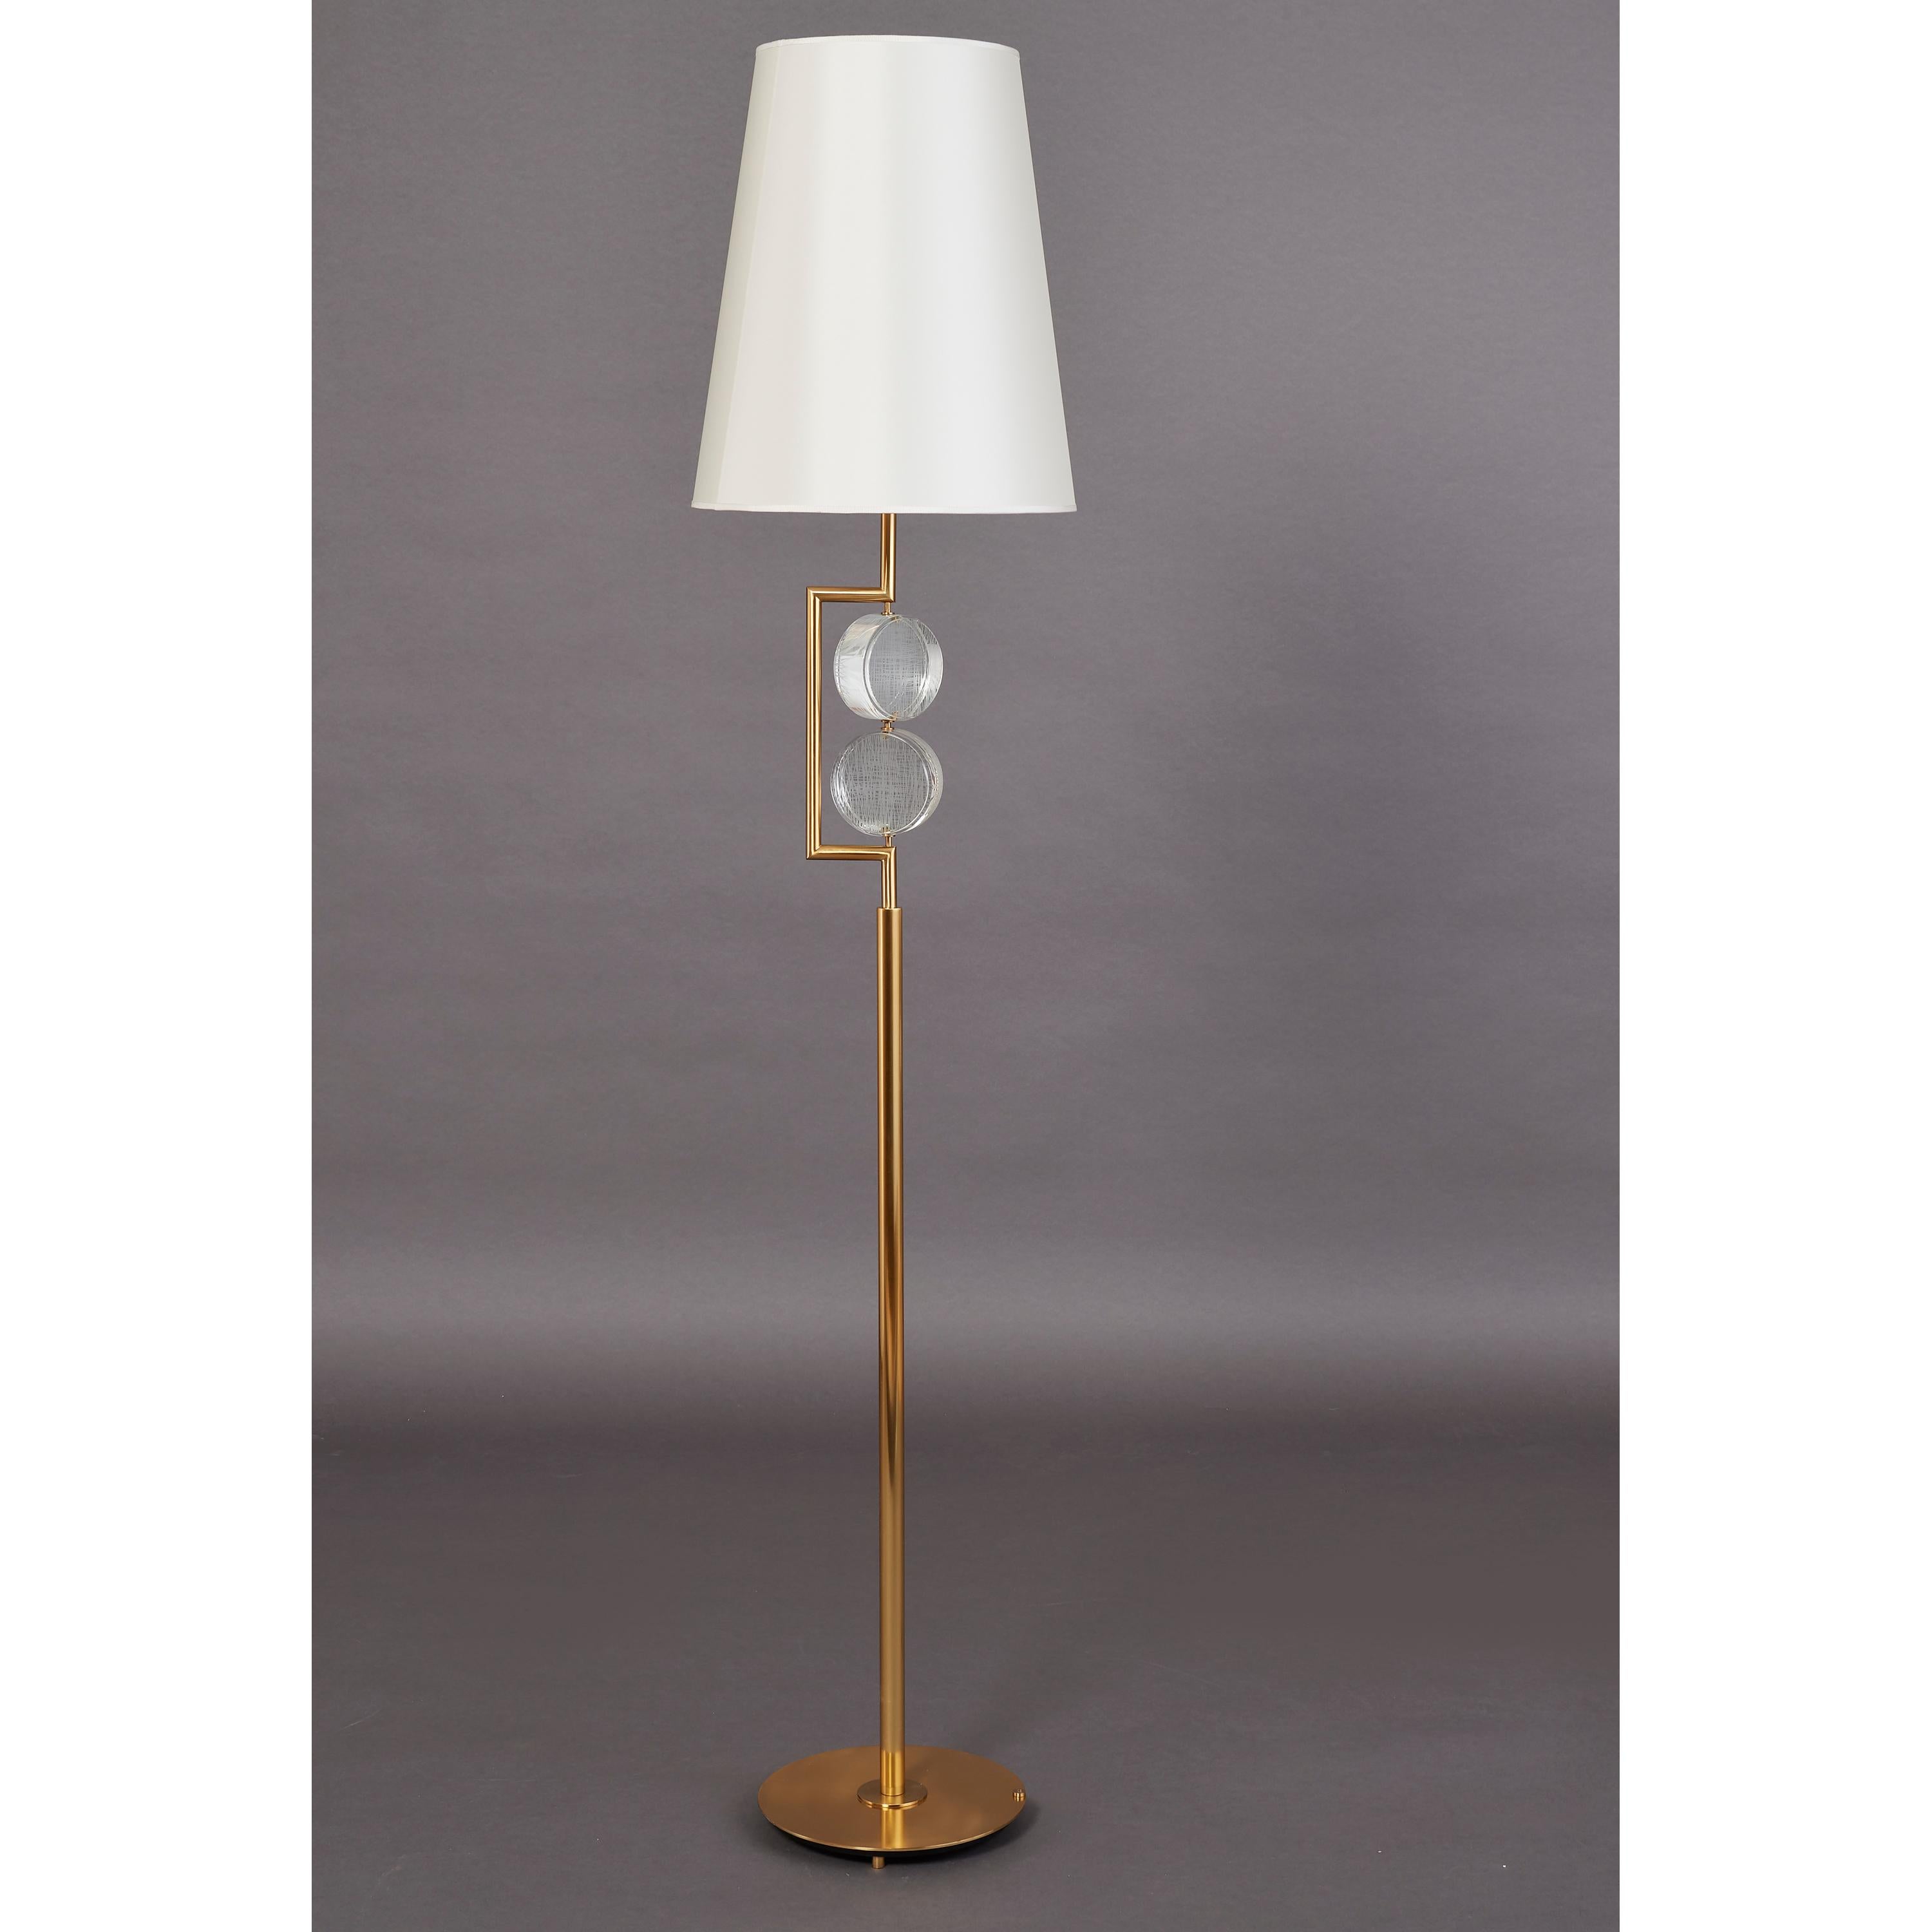 Roberto Guilio Rida
Standing lamp from the Bottoni series designed for L'Art de Vivre
Hand ground optical clear glass engraved on both sides with delicate tracery, brass mounts.
Italy, 2018
Measures: 14 Ø x 68 H
Wired for the USA with 4